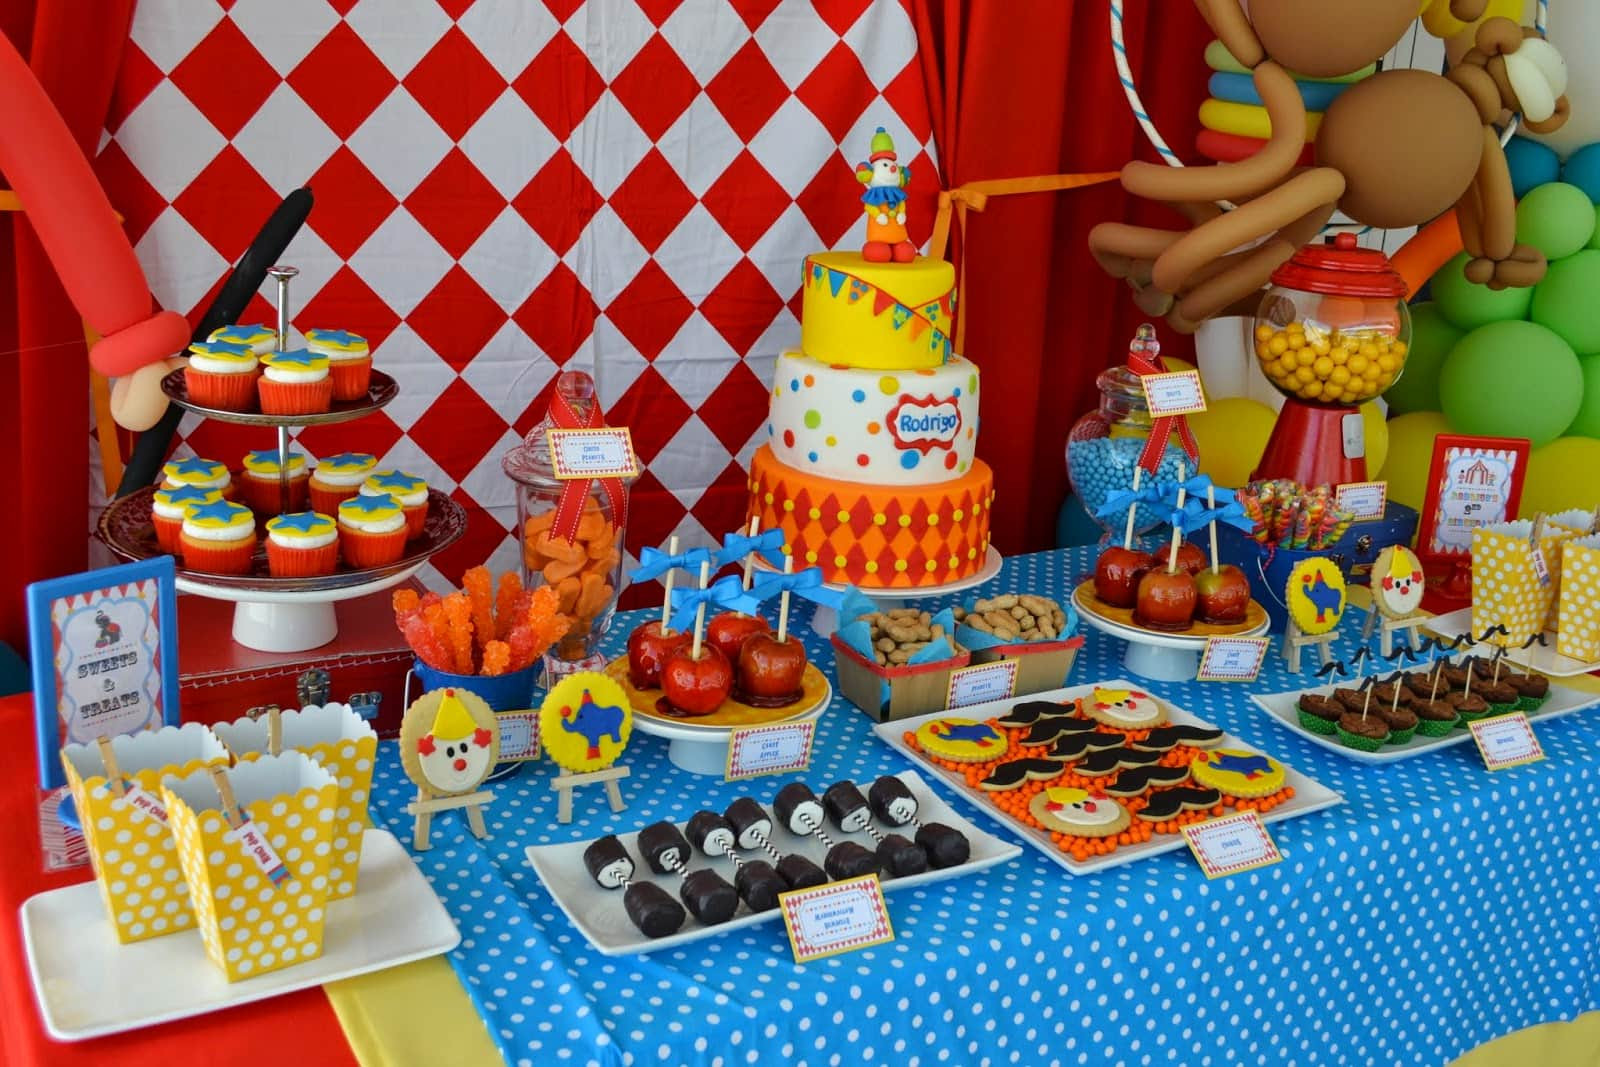 Ideas For Boy Birthday Party
 33 Awesome Birthday Party Ideas for Boys